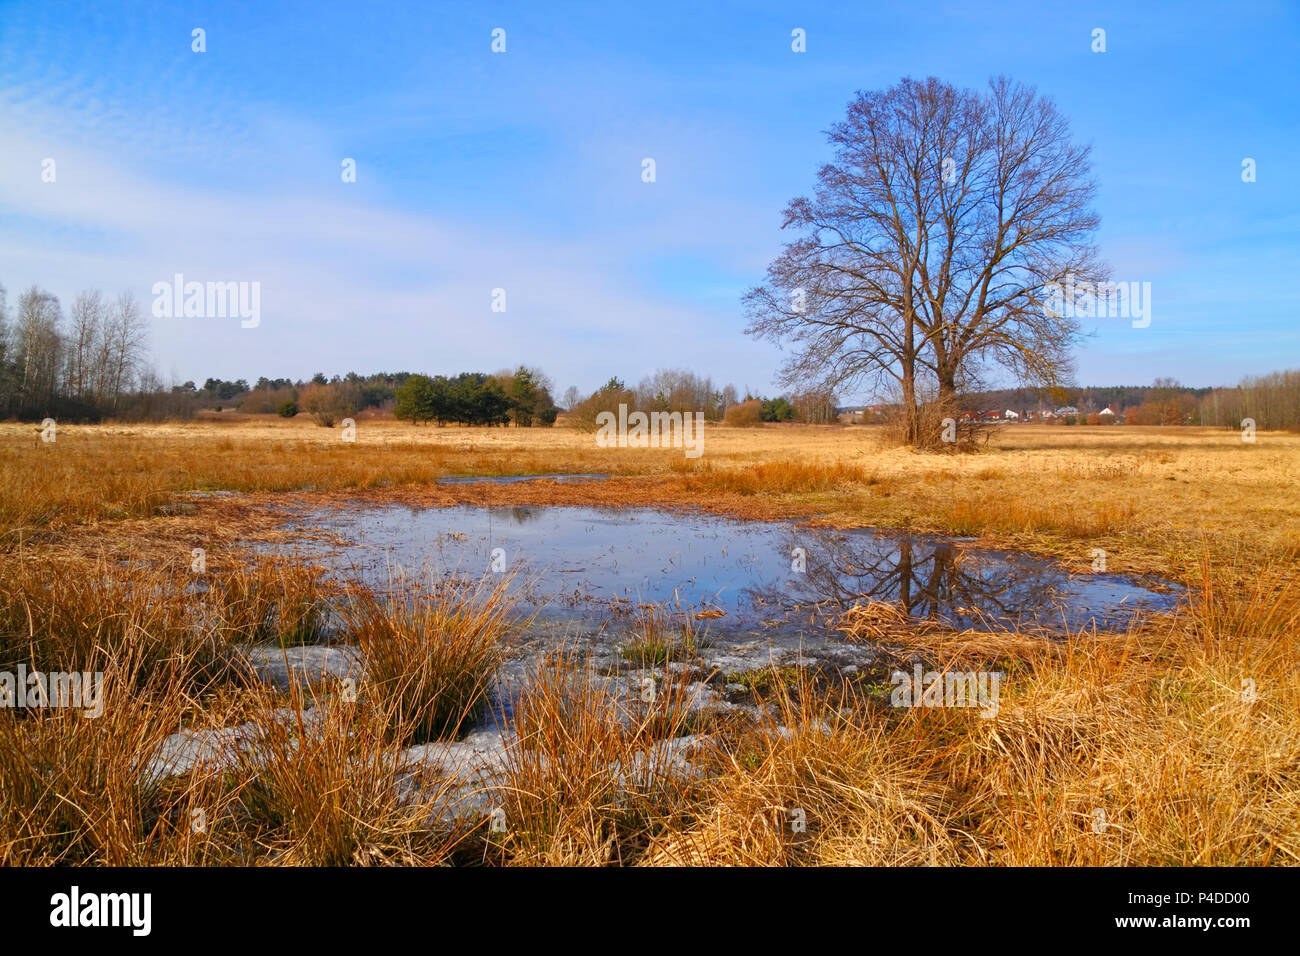 Dry grasses and small pond on flood-meadow at early spring with trees. Poland, The Holy Cross Mountains. Stock Photo